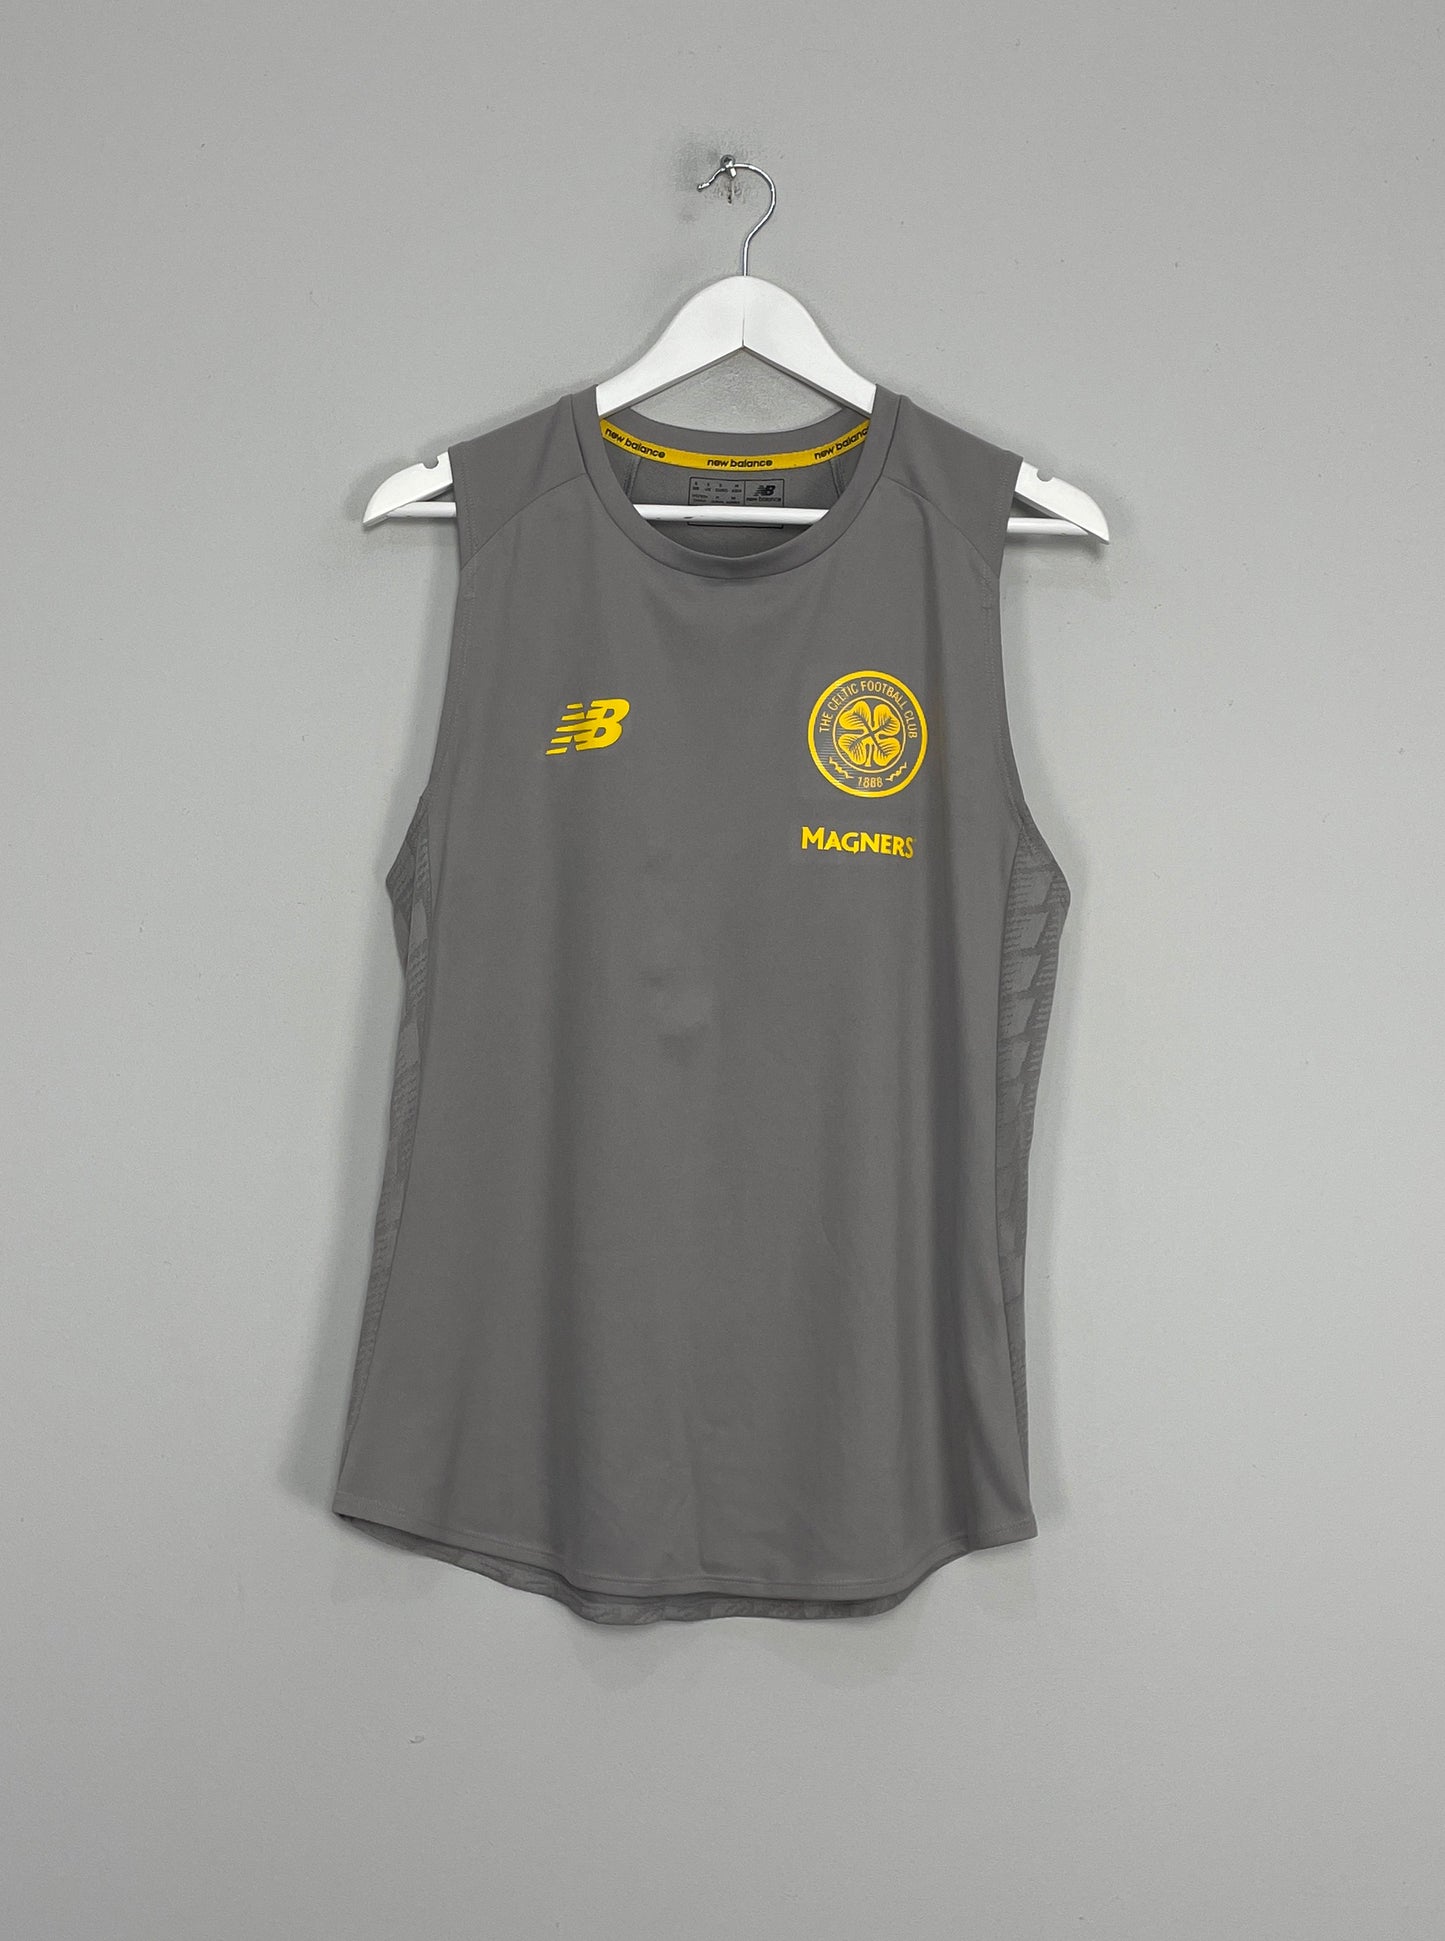 Image of the Celtic training shirt from the 2018/19 season